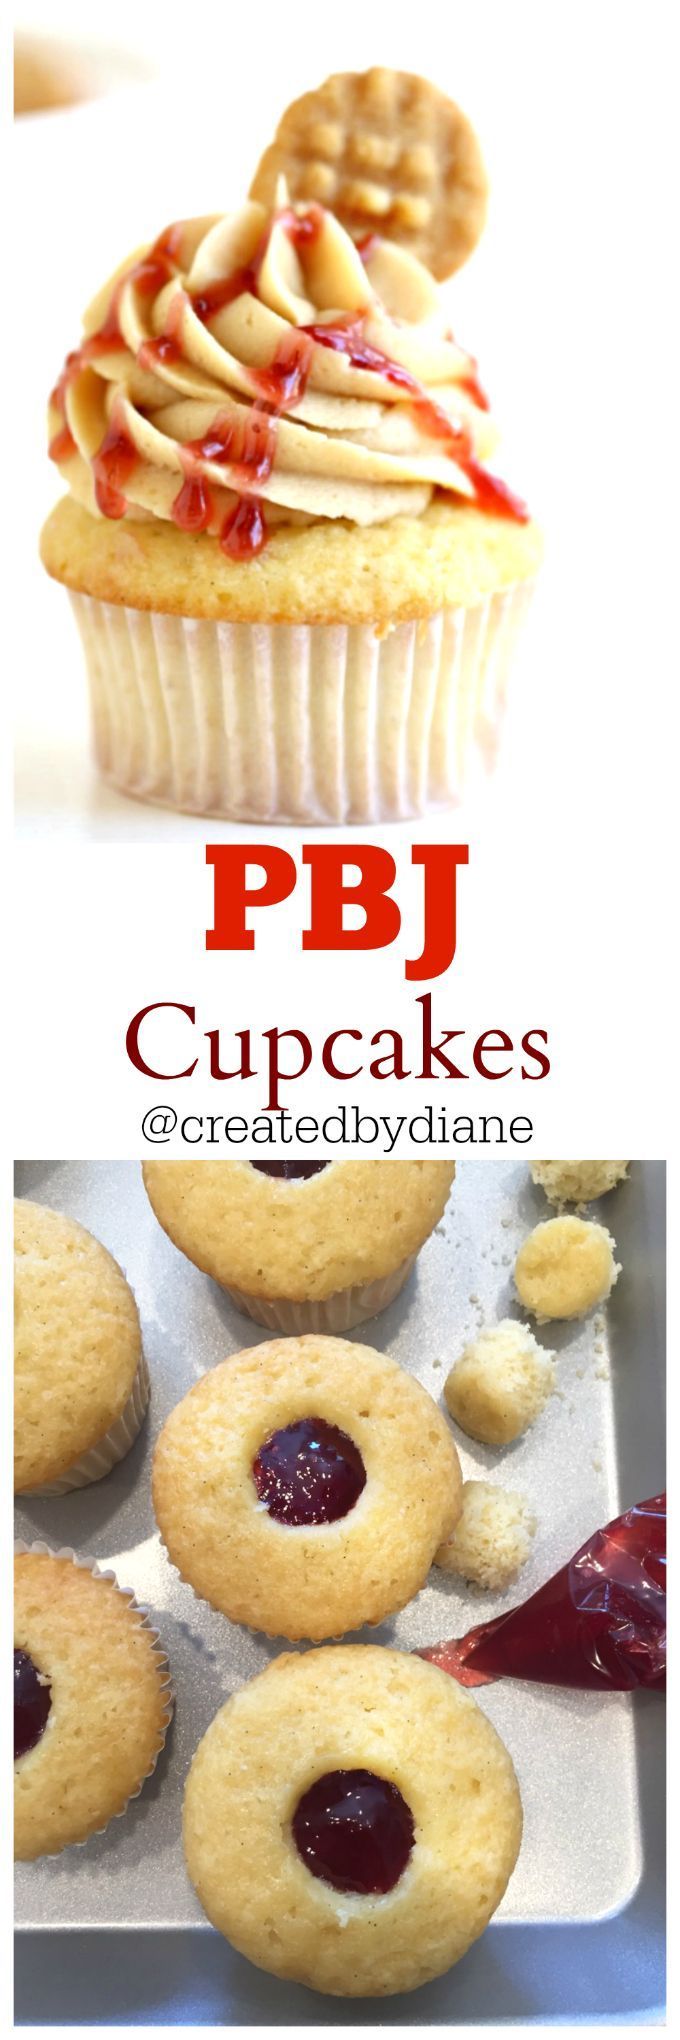 pbj cupcakes, these peanut butter and jelly cupcakes are simple to make and enjoyed by all. They are flled with jam and are